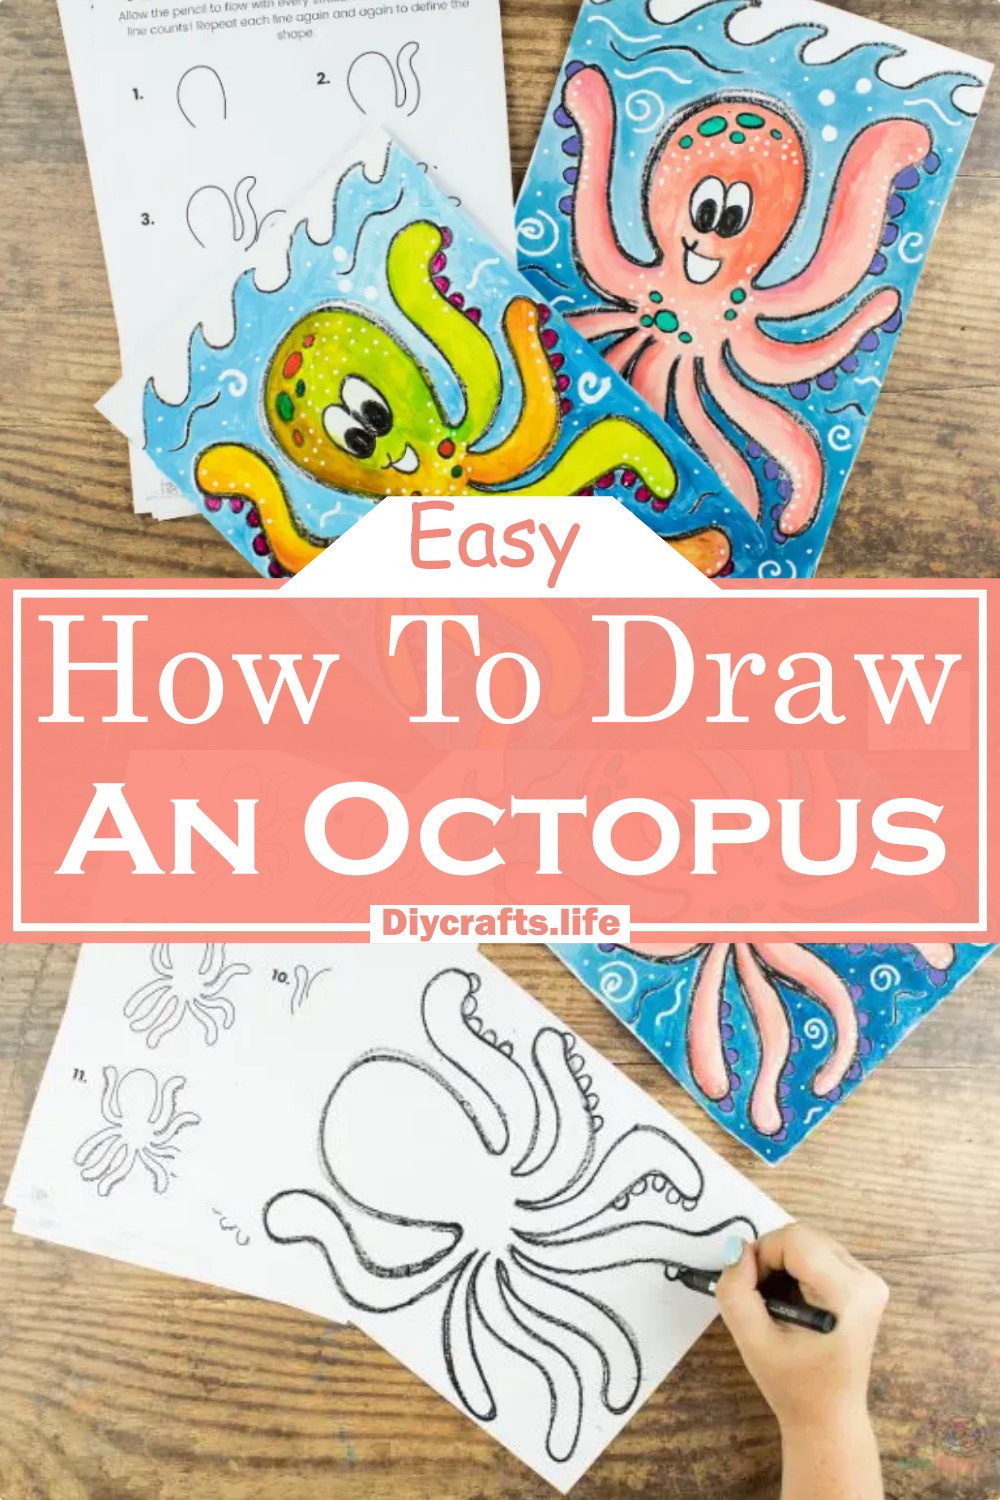 How To Draw An Octopus 1